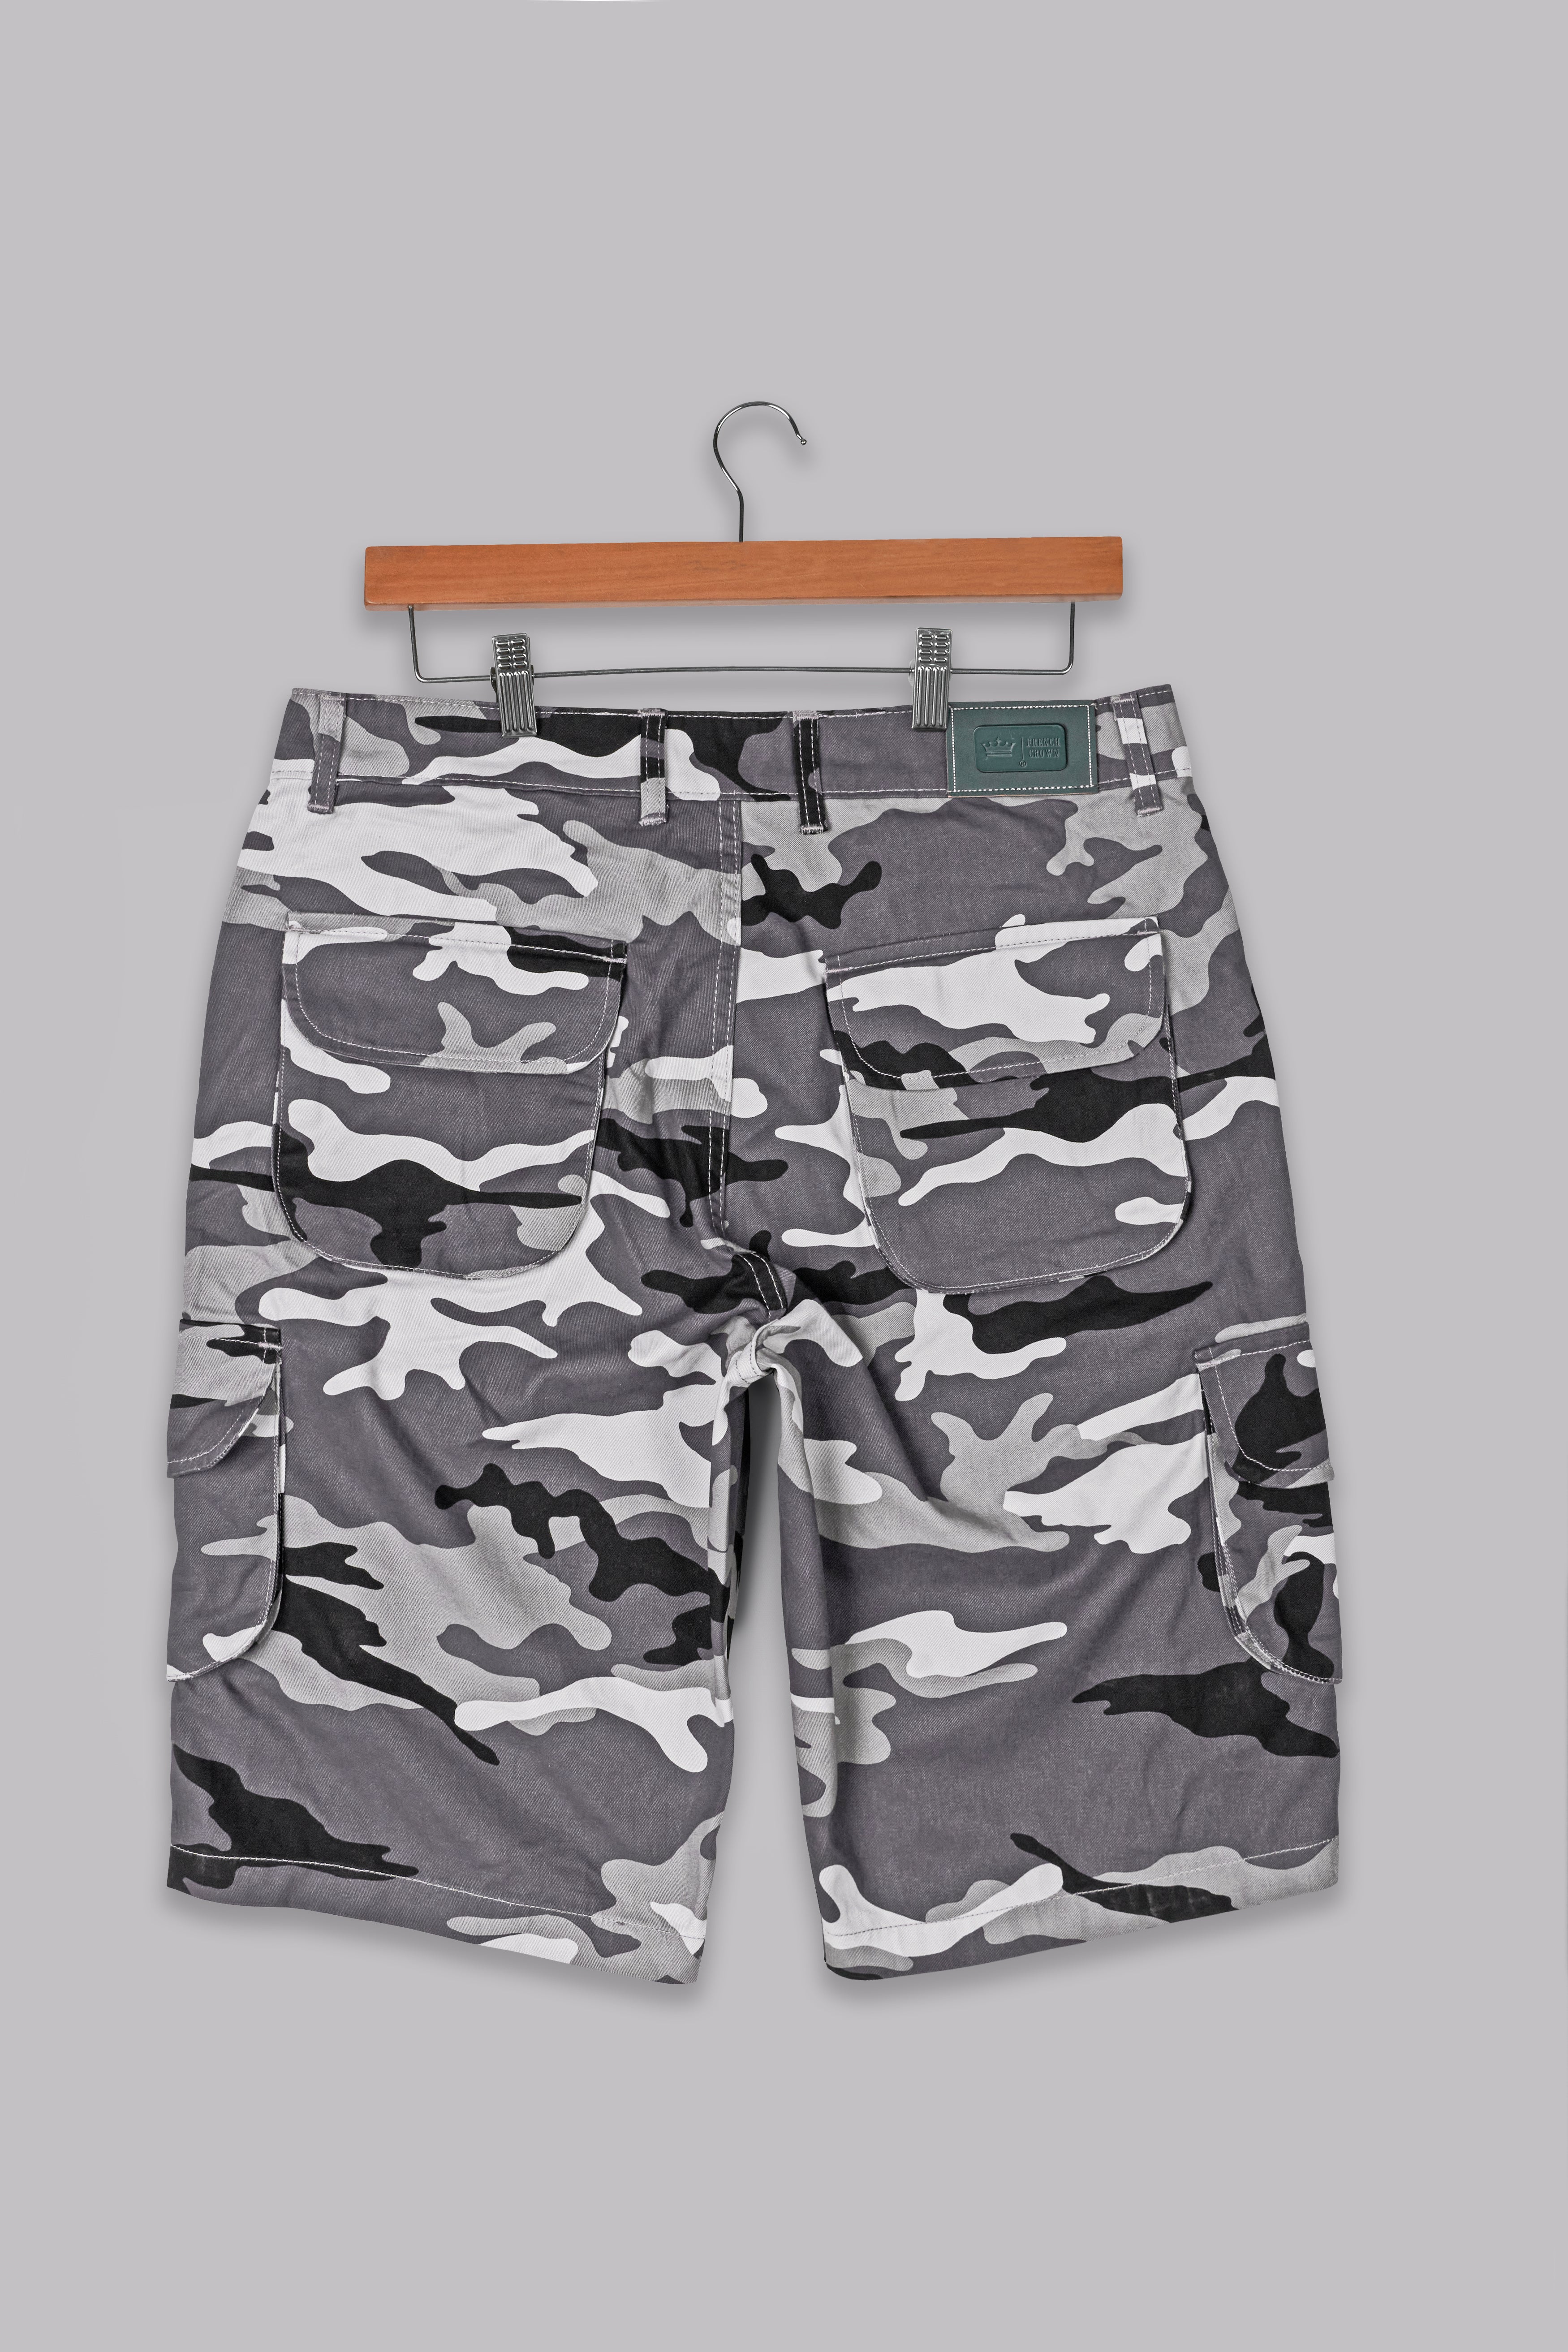 Porcelain White with Fuscous Gray and Black Camouflage Cargo Shorts SR276-28, SR276-30, SR276-32, SR276-34, SR276-36, SR276-38, SR276-40, SR276-42, SR276-44